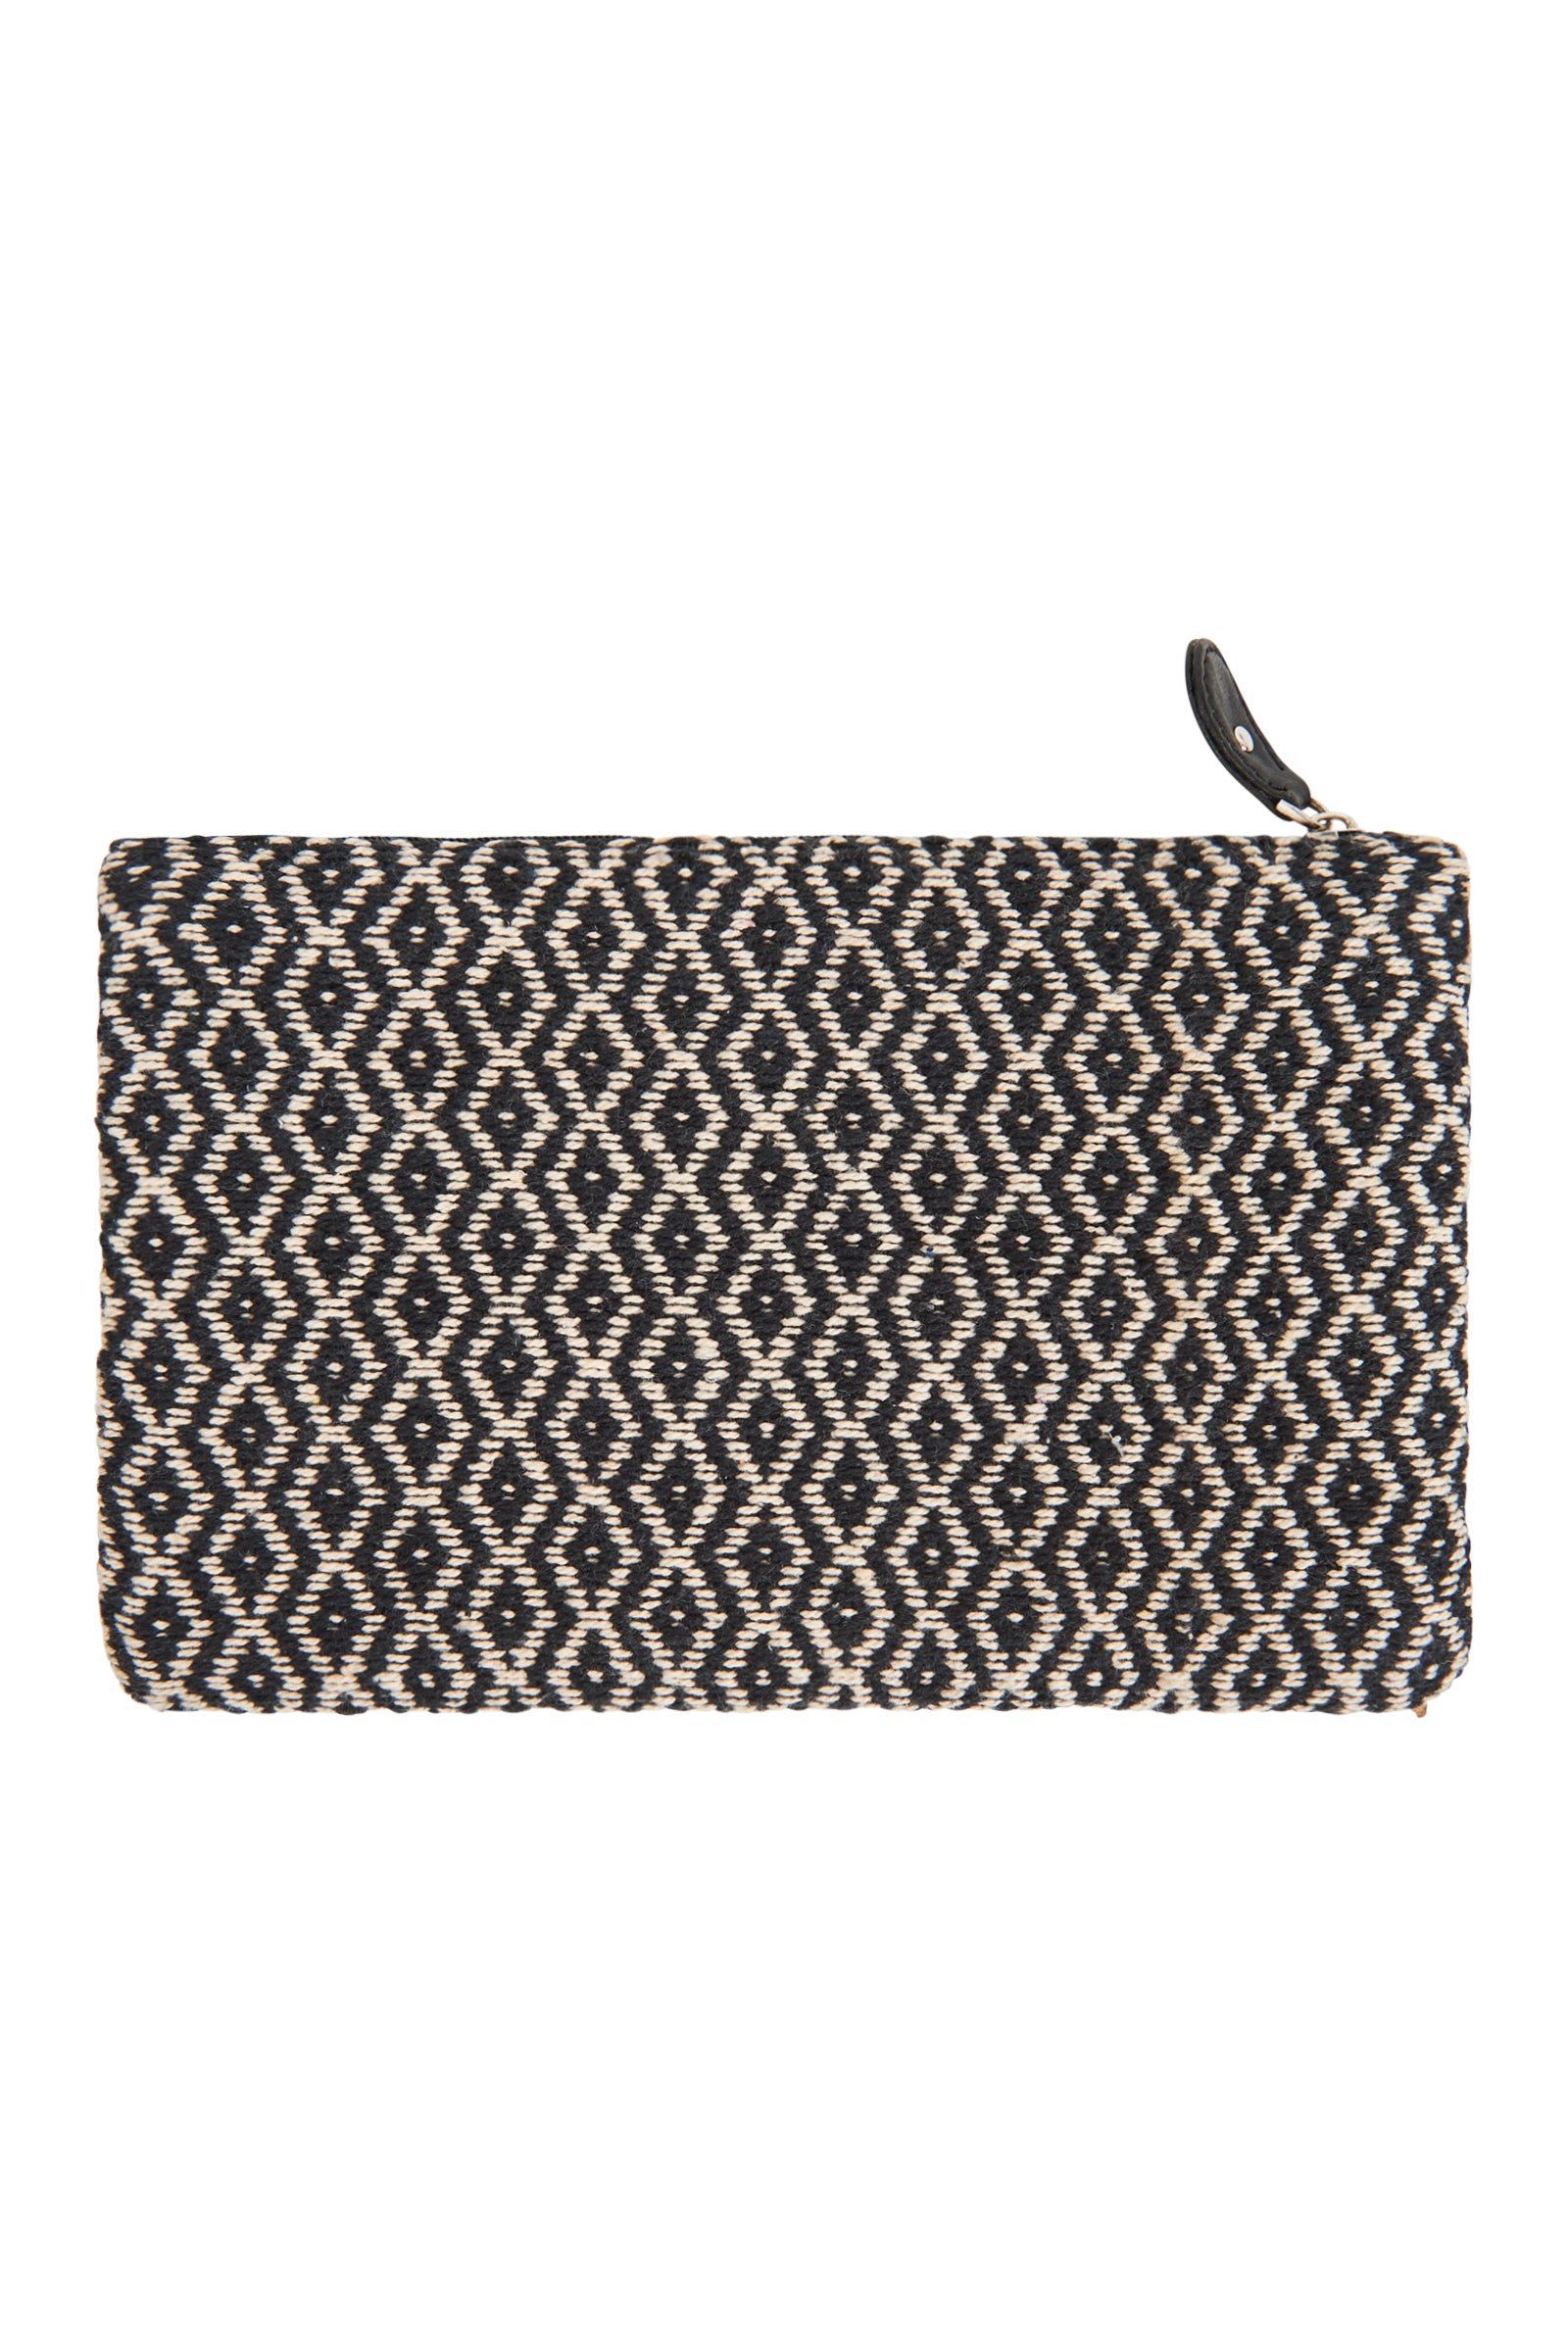 Paarl Pouch - Alloy - eb&ive Bag